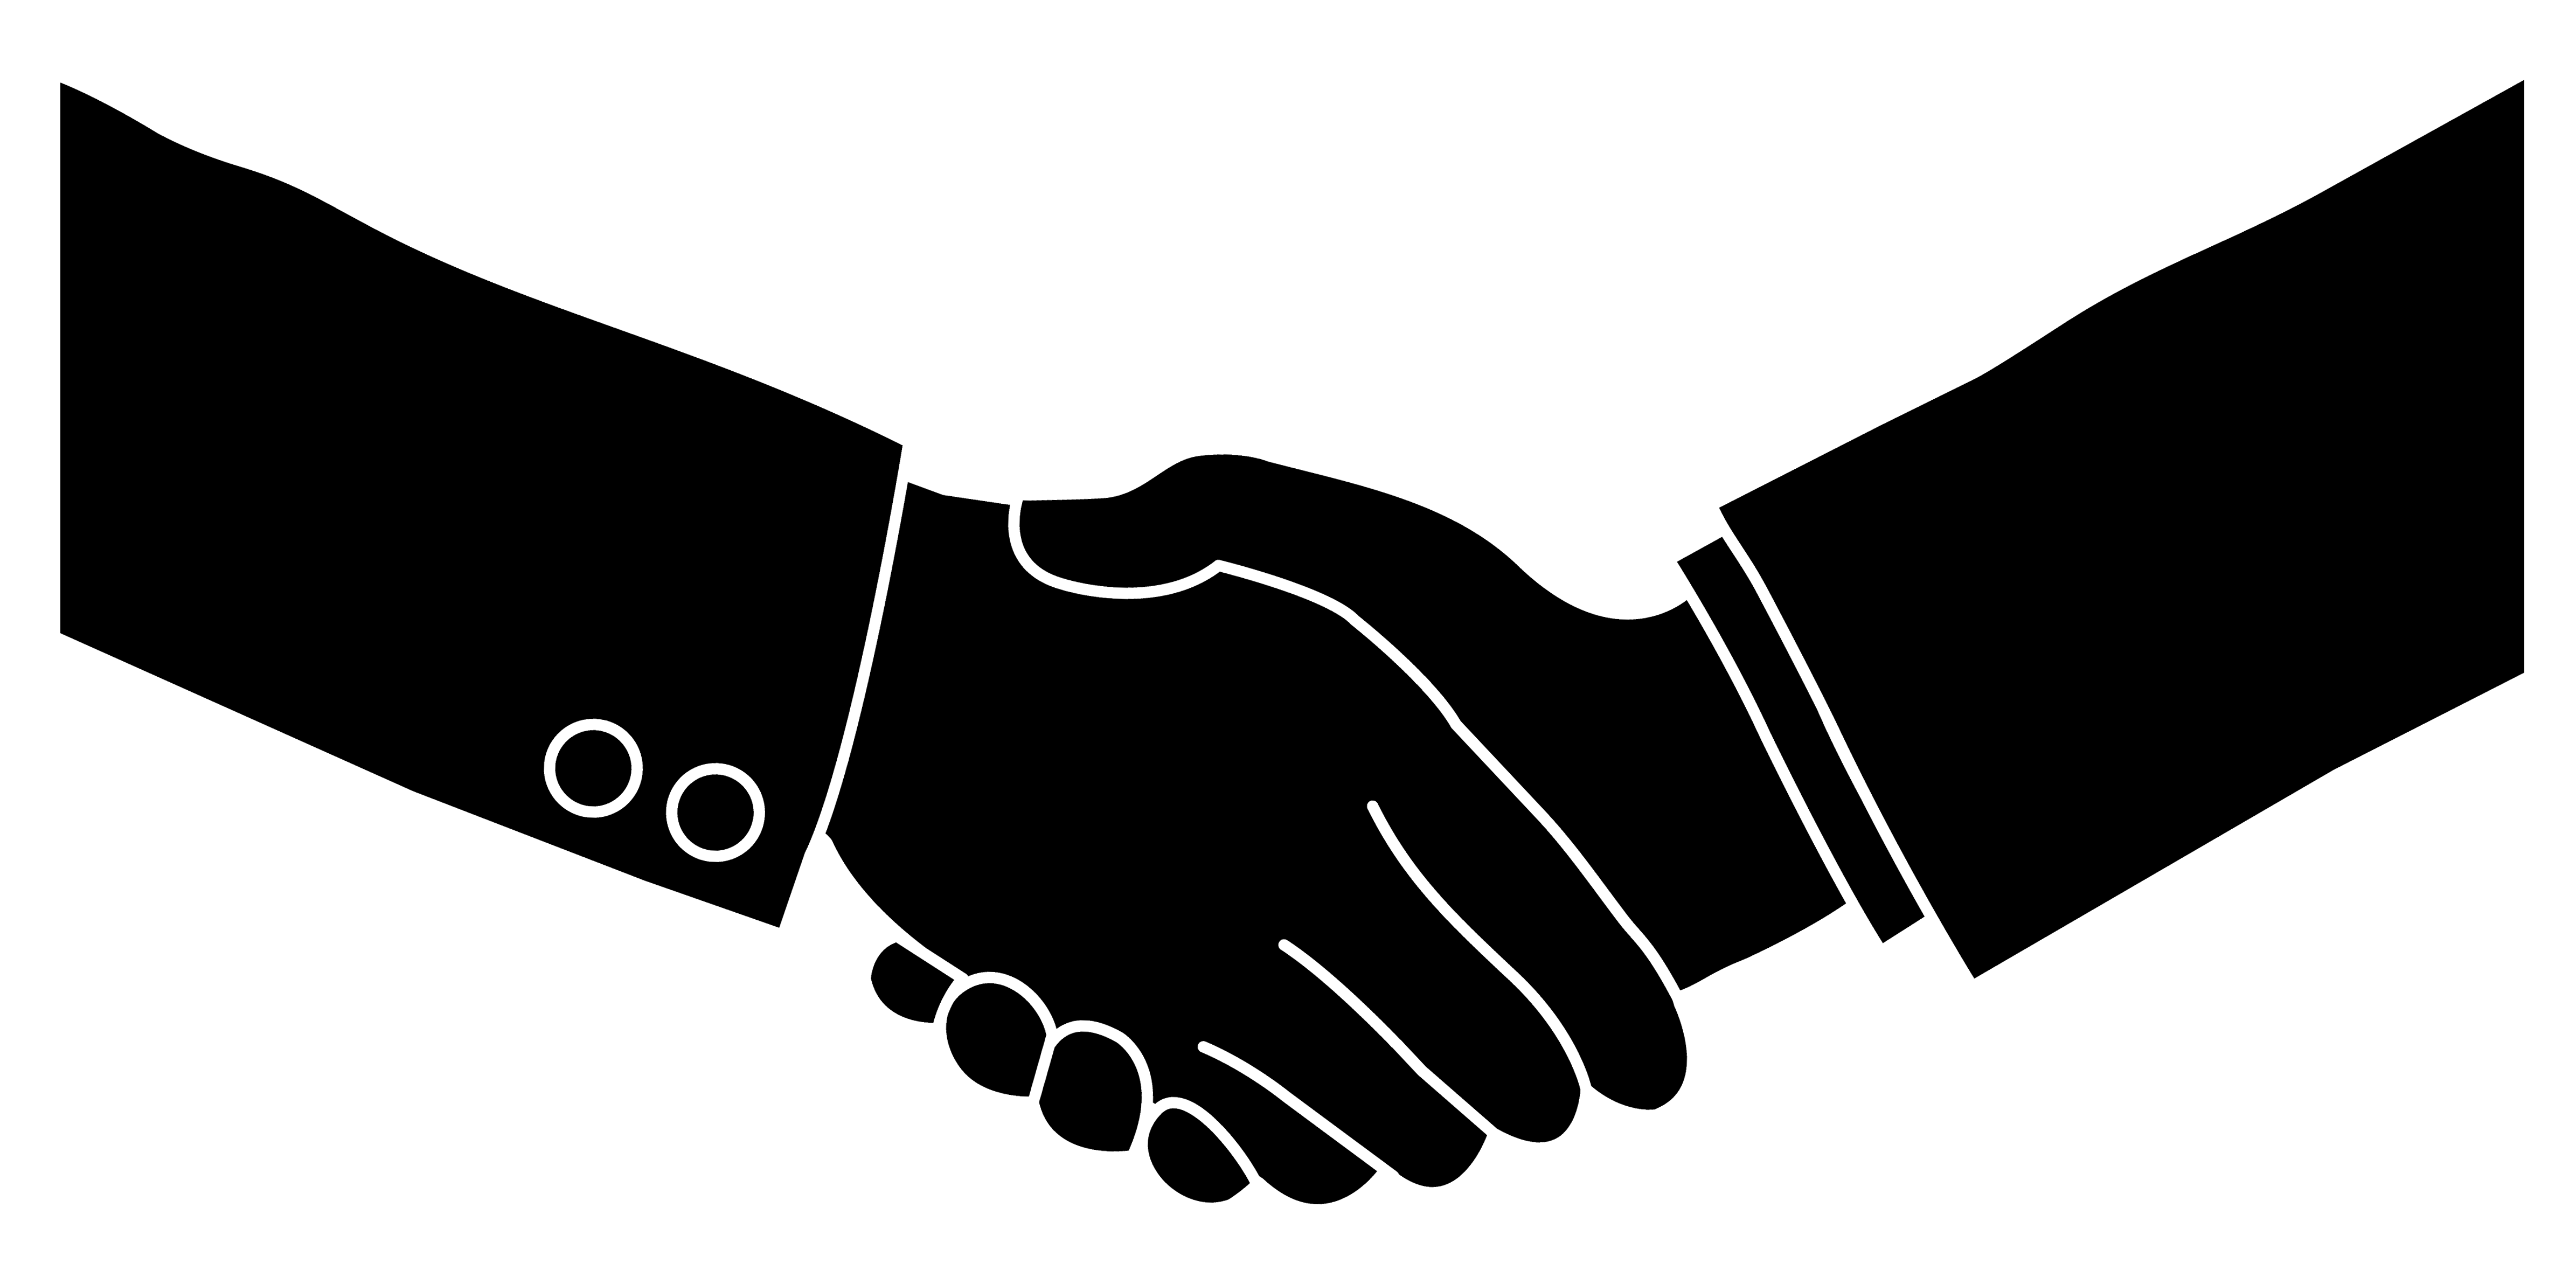 Shaking Hands Clip Art Png Clipart Panda Free Clipart Images